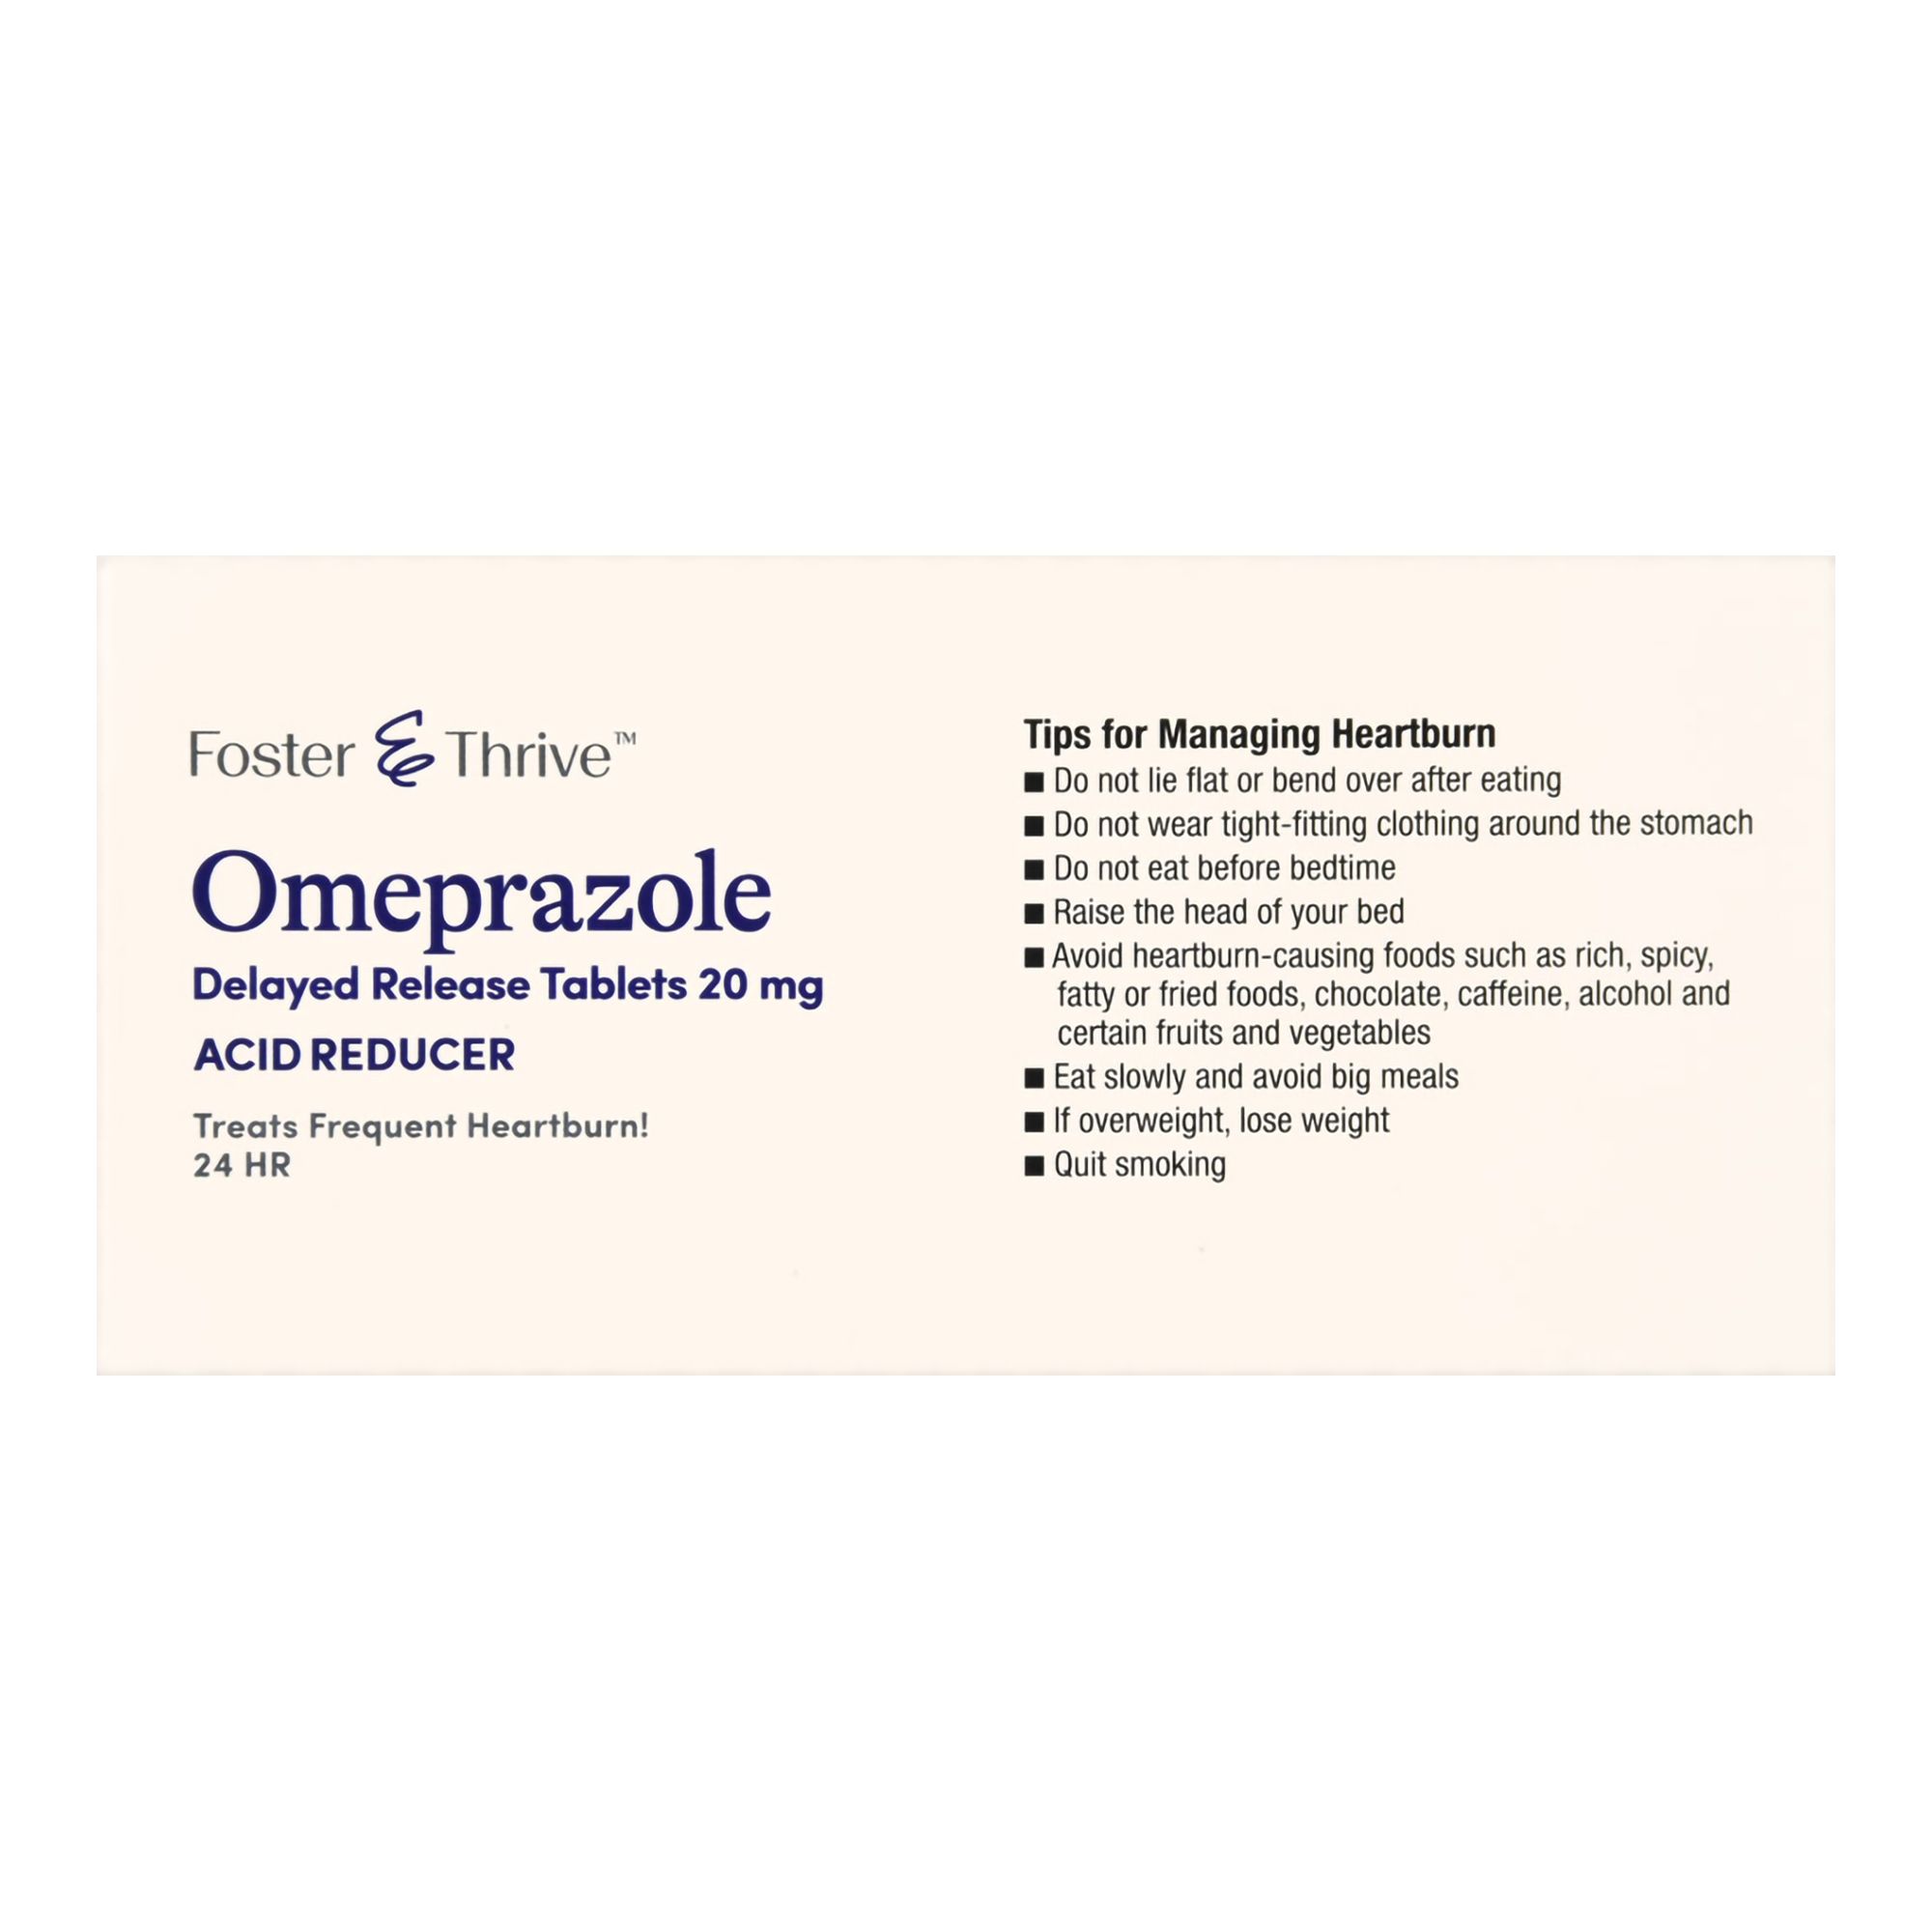 Foster & Thrive Omeprazole Delayed Release Acid Reducer Tablets, 20 mg - 42 ct